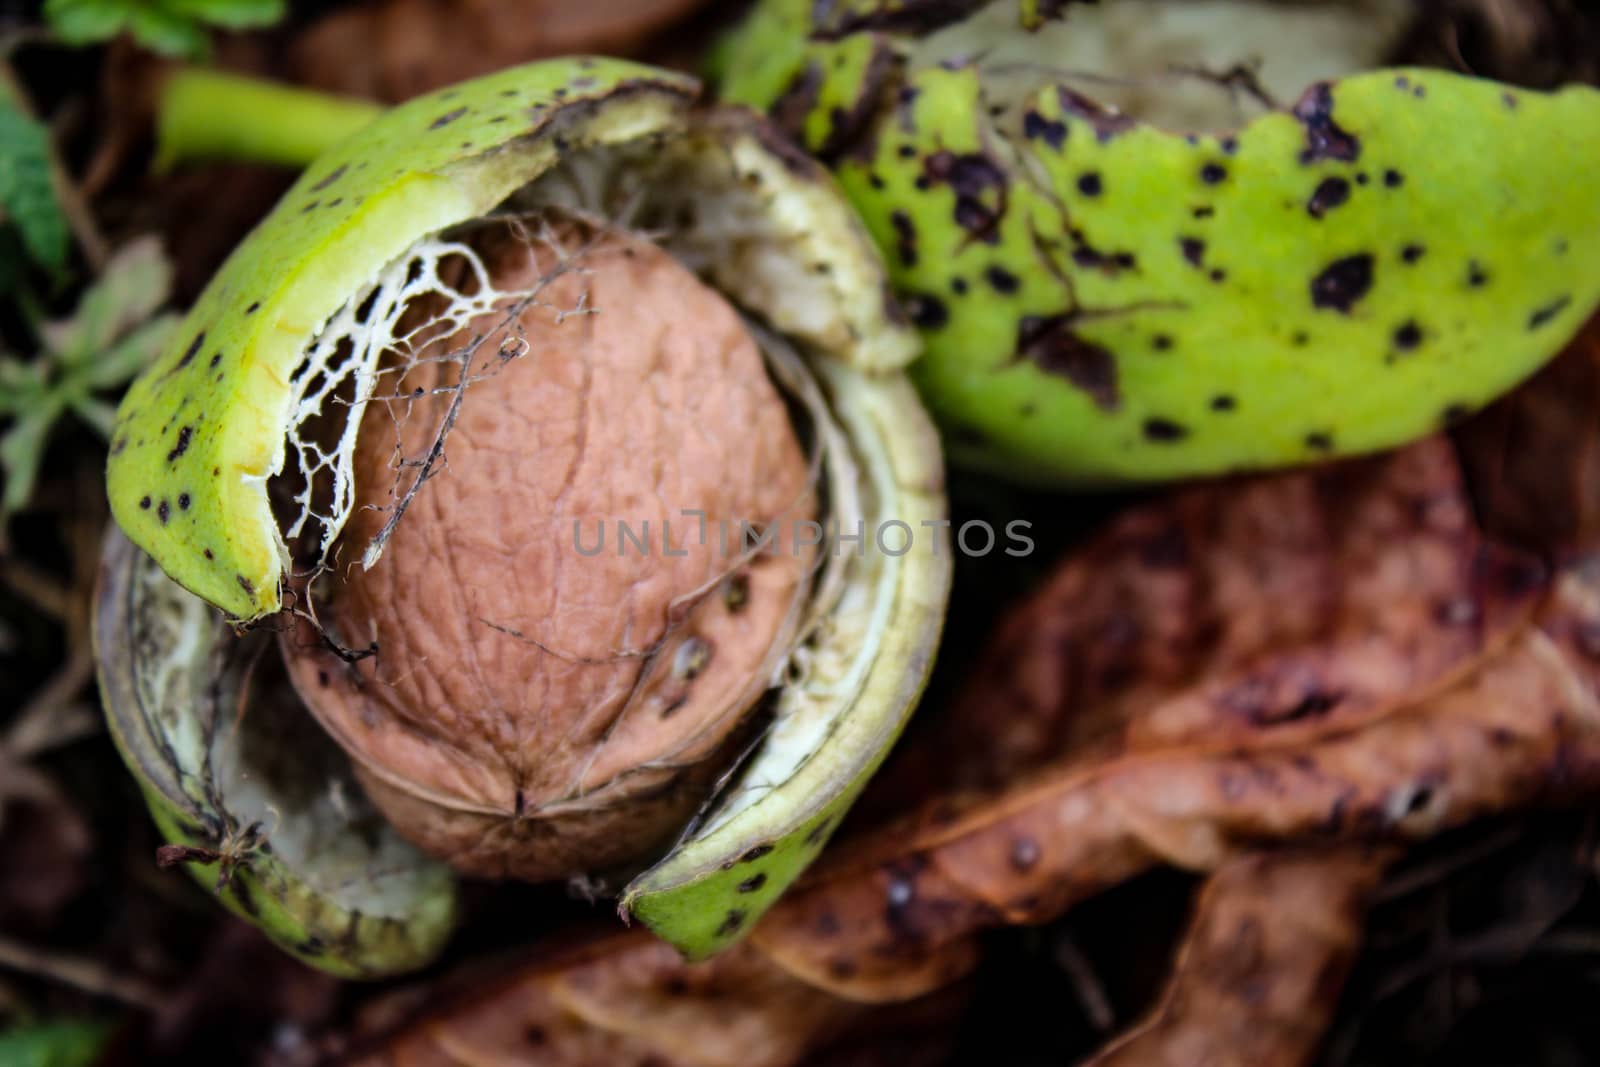 A ripe walnut with an open shell fell to the ground among the dried leaves. Zavidovici, Bosnia and Herzegovina.